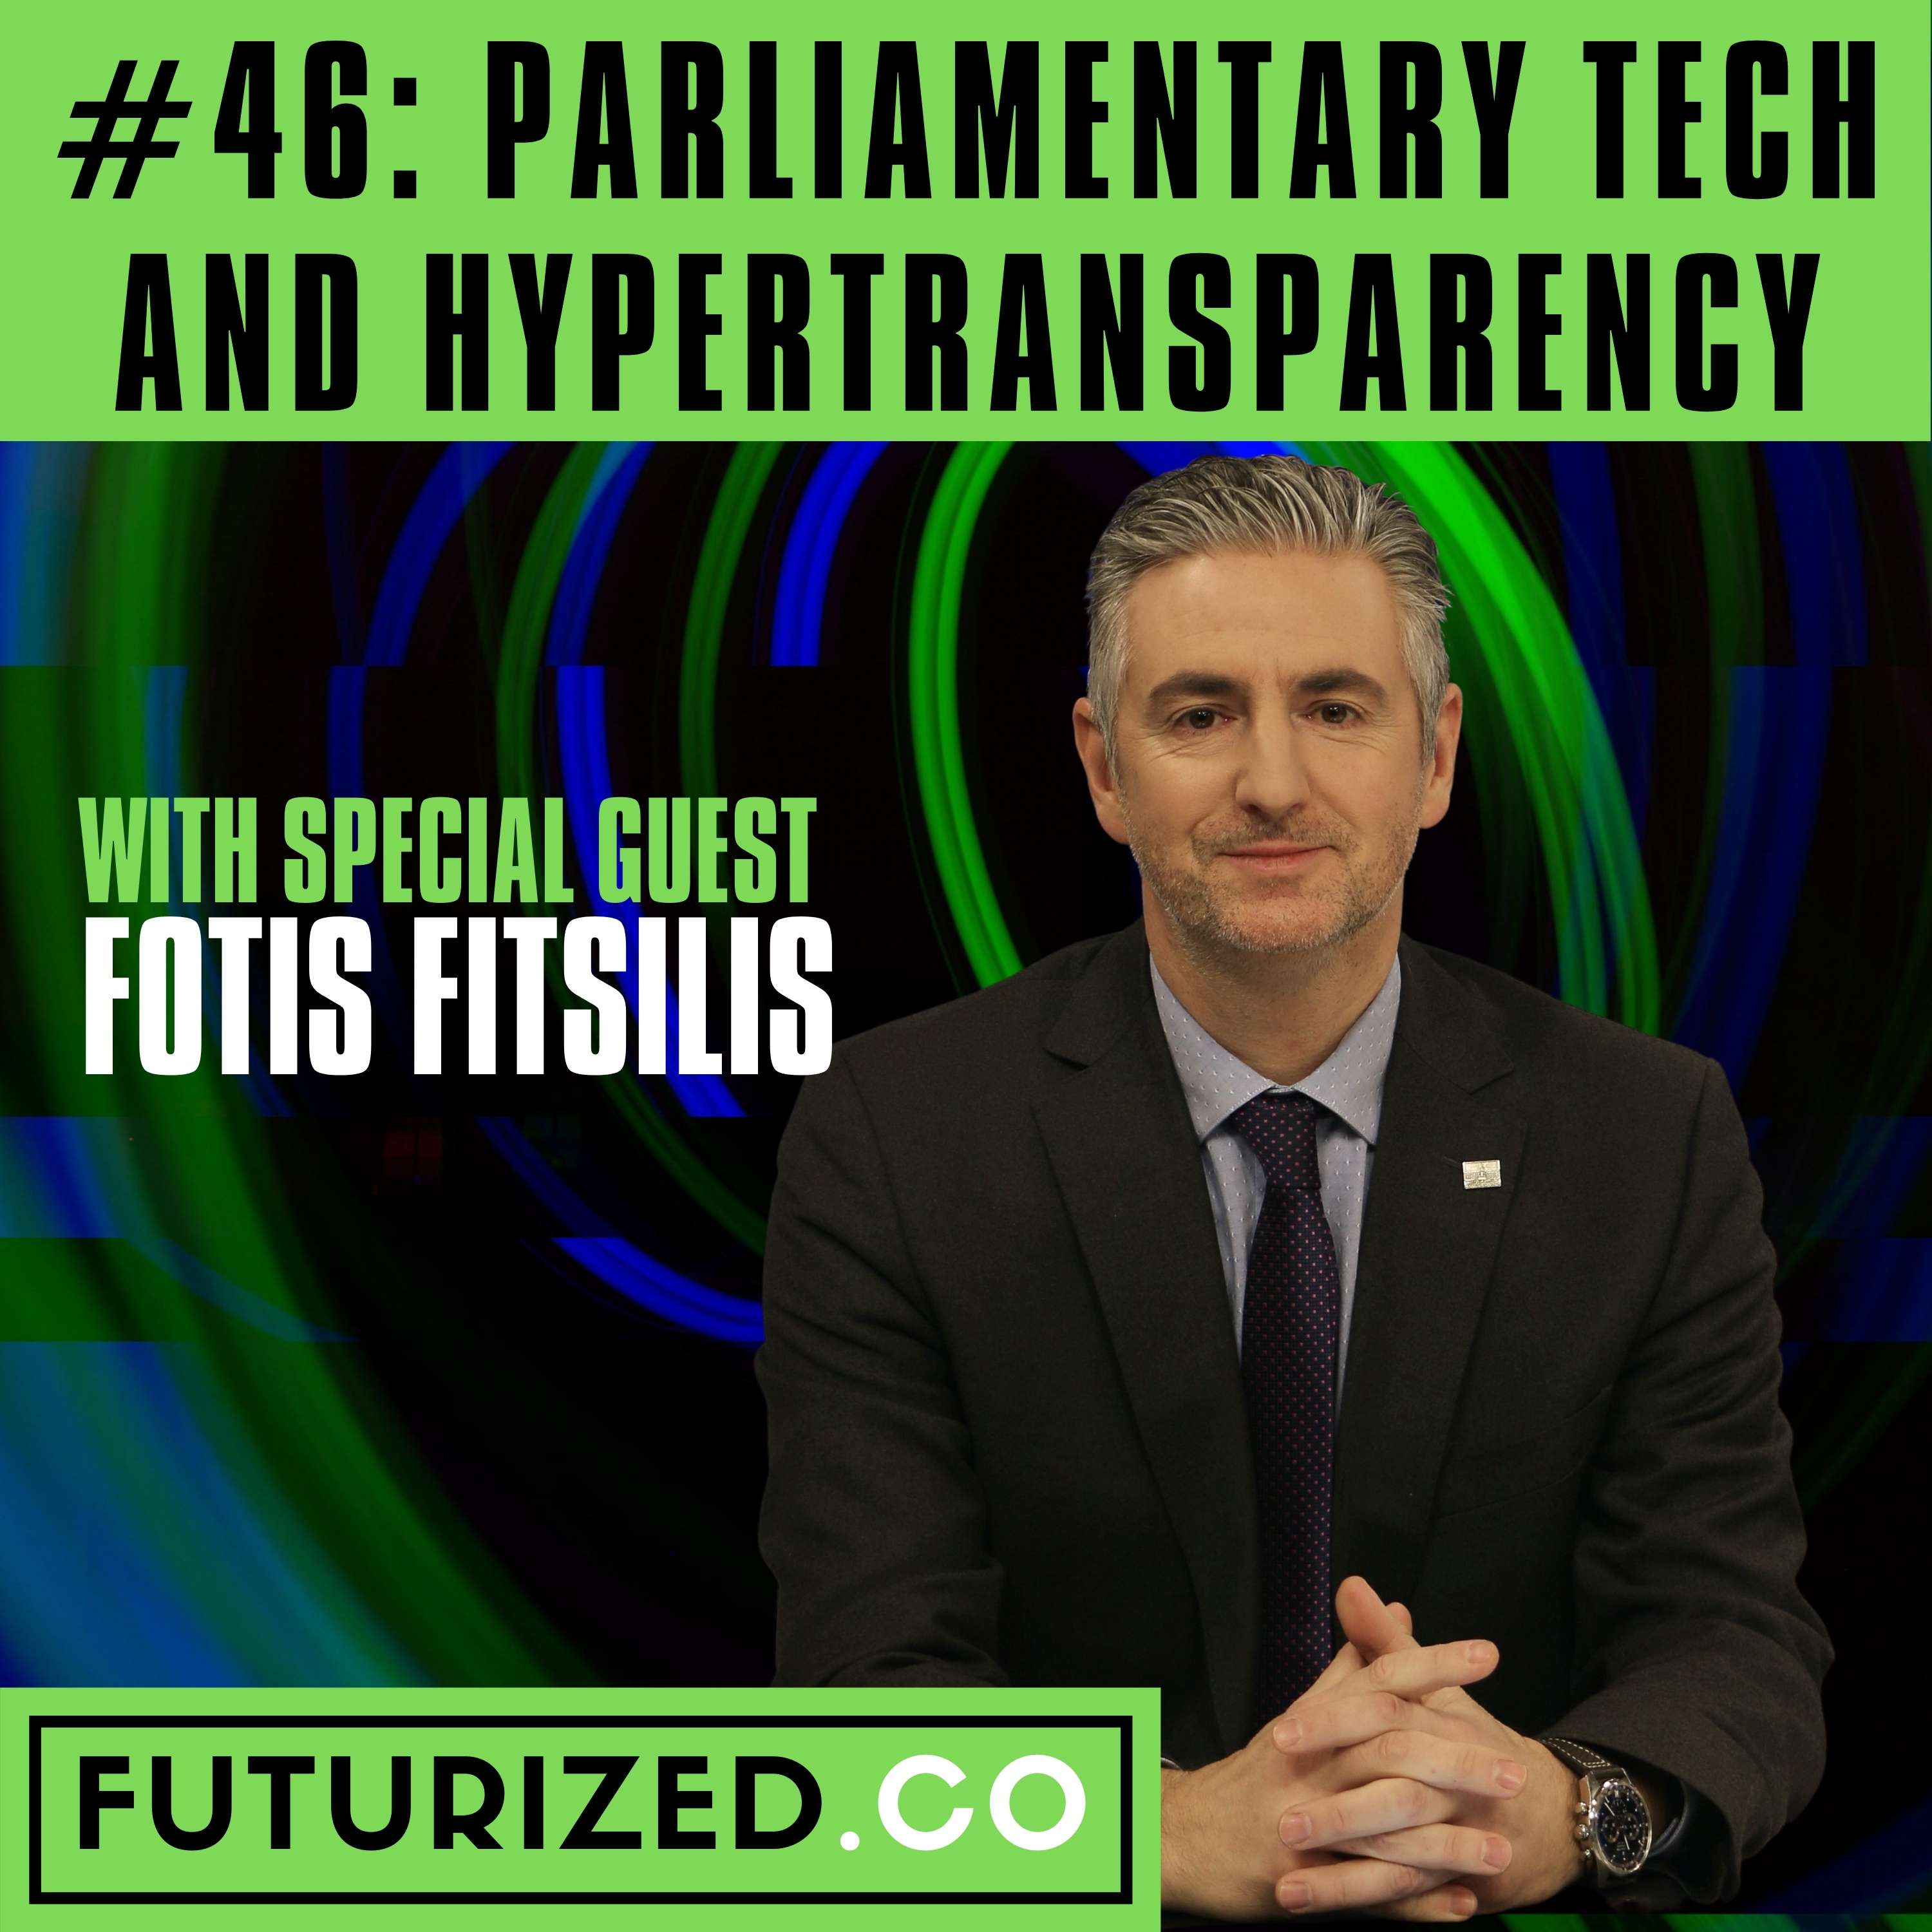 Parliamentary Tech and Hypertransparency Image